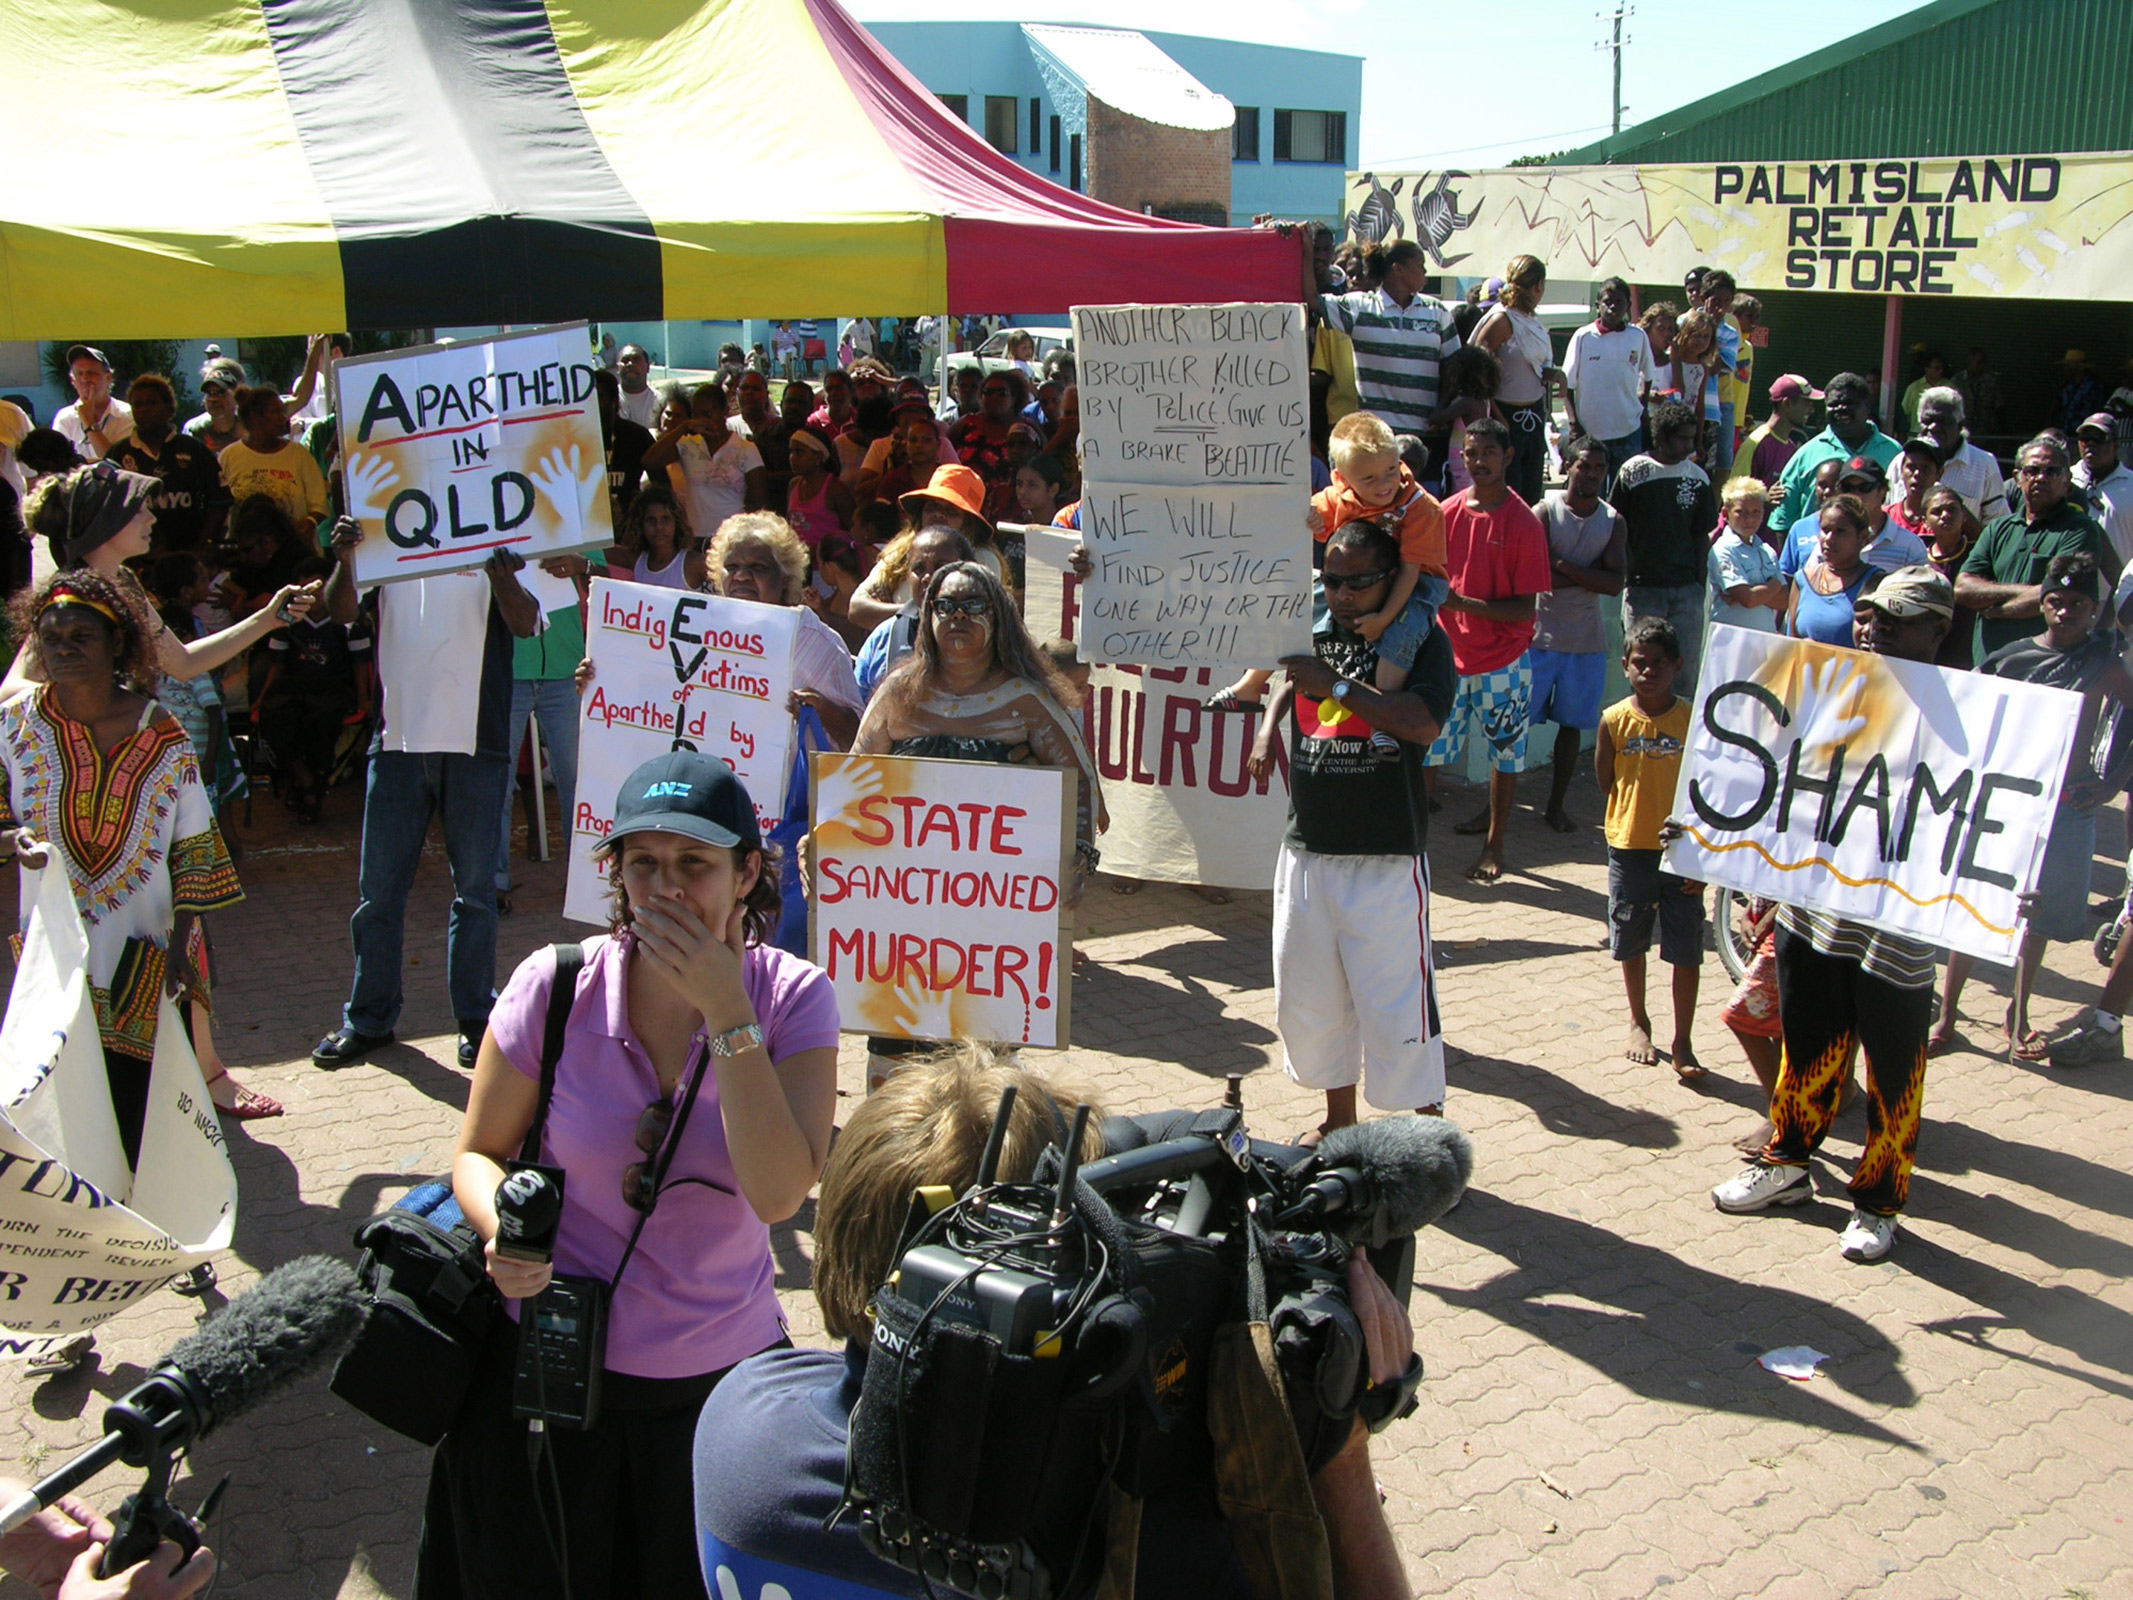 Protest relating to Cameron Doomadgee’s 2004 death in police custody, Palm Island, 2006